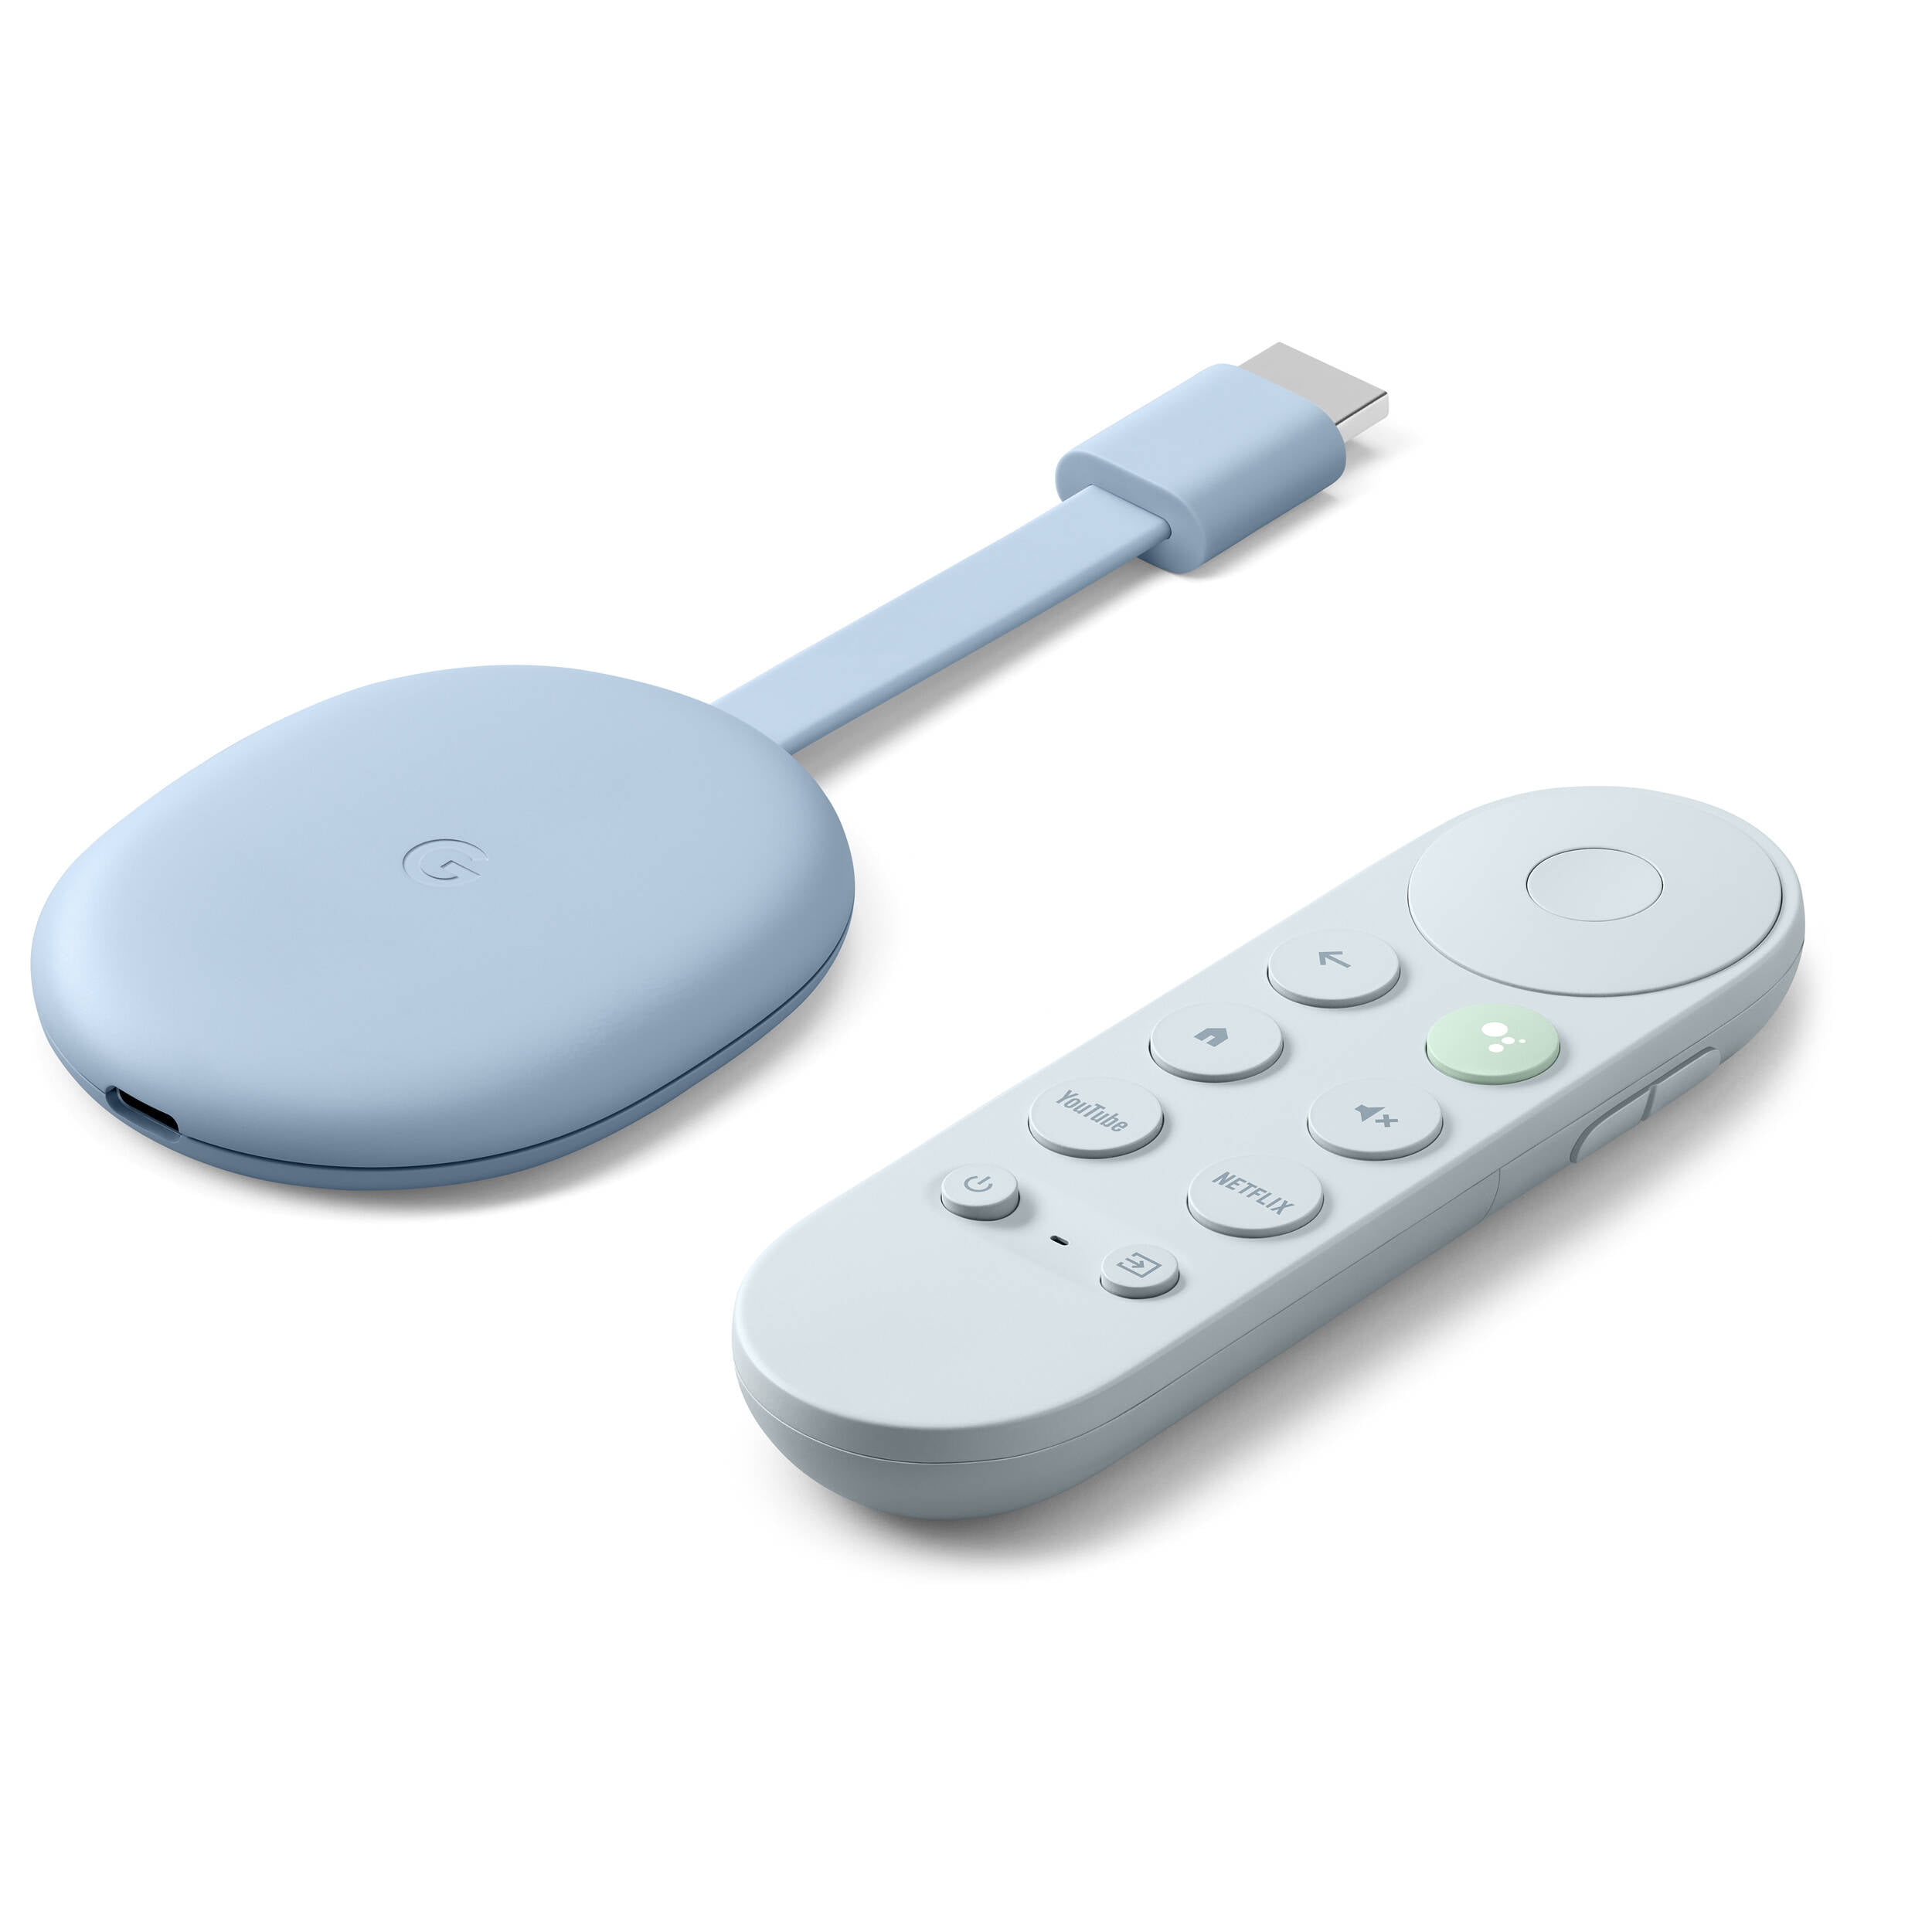 How to install APKs in Chromecast with Google TV?